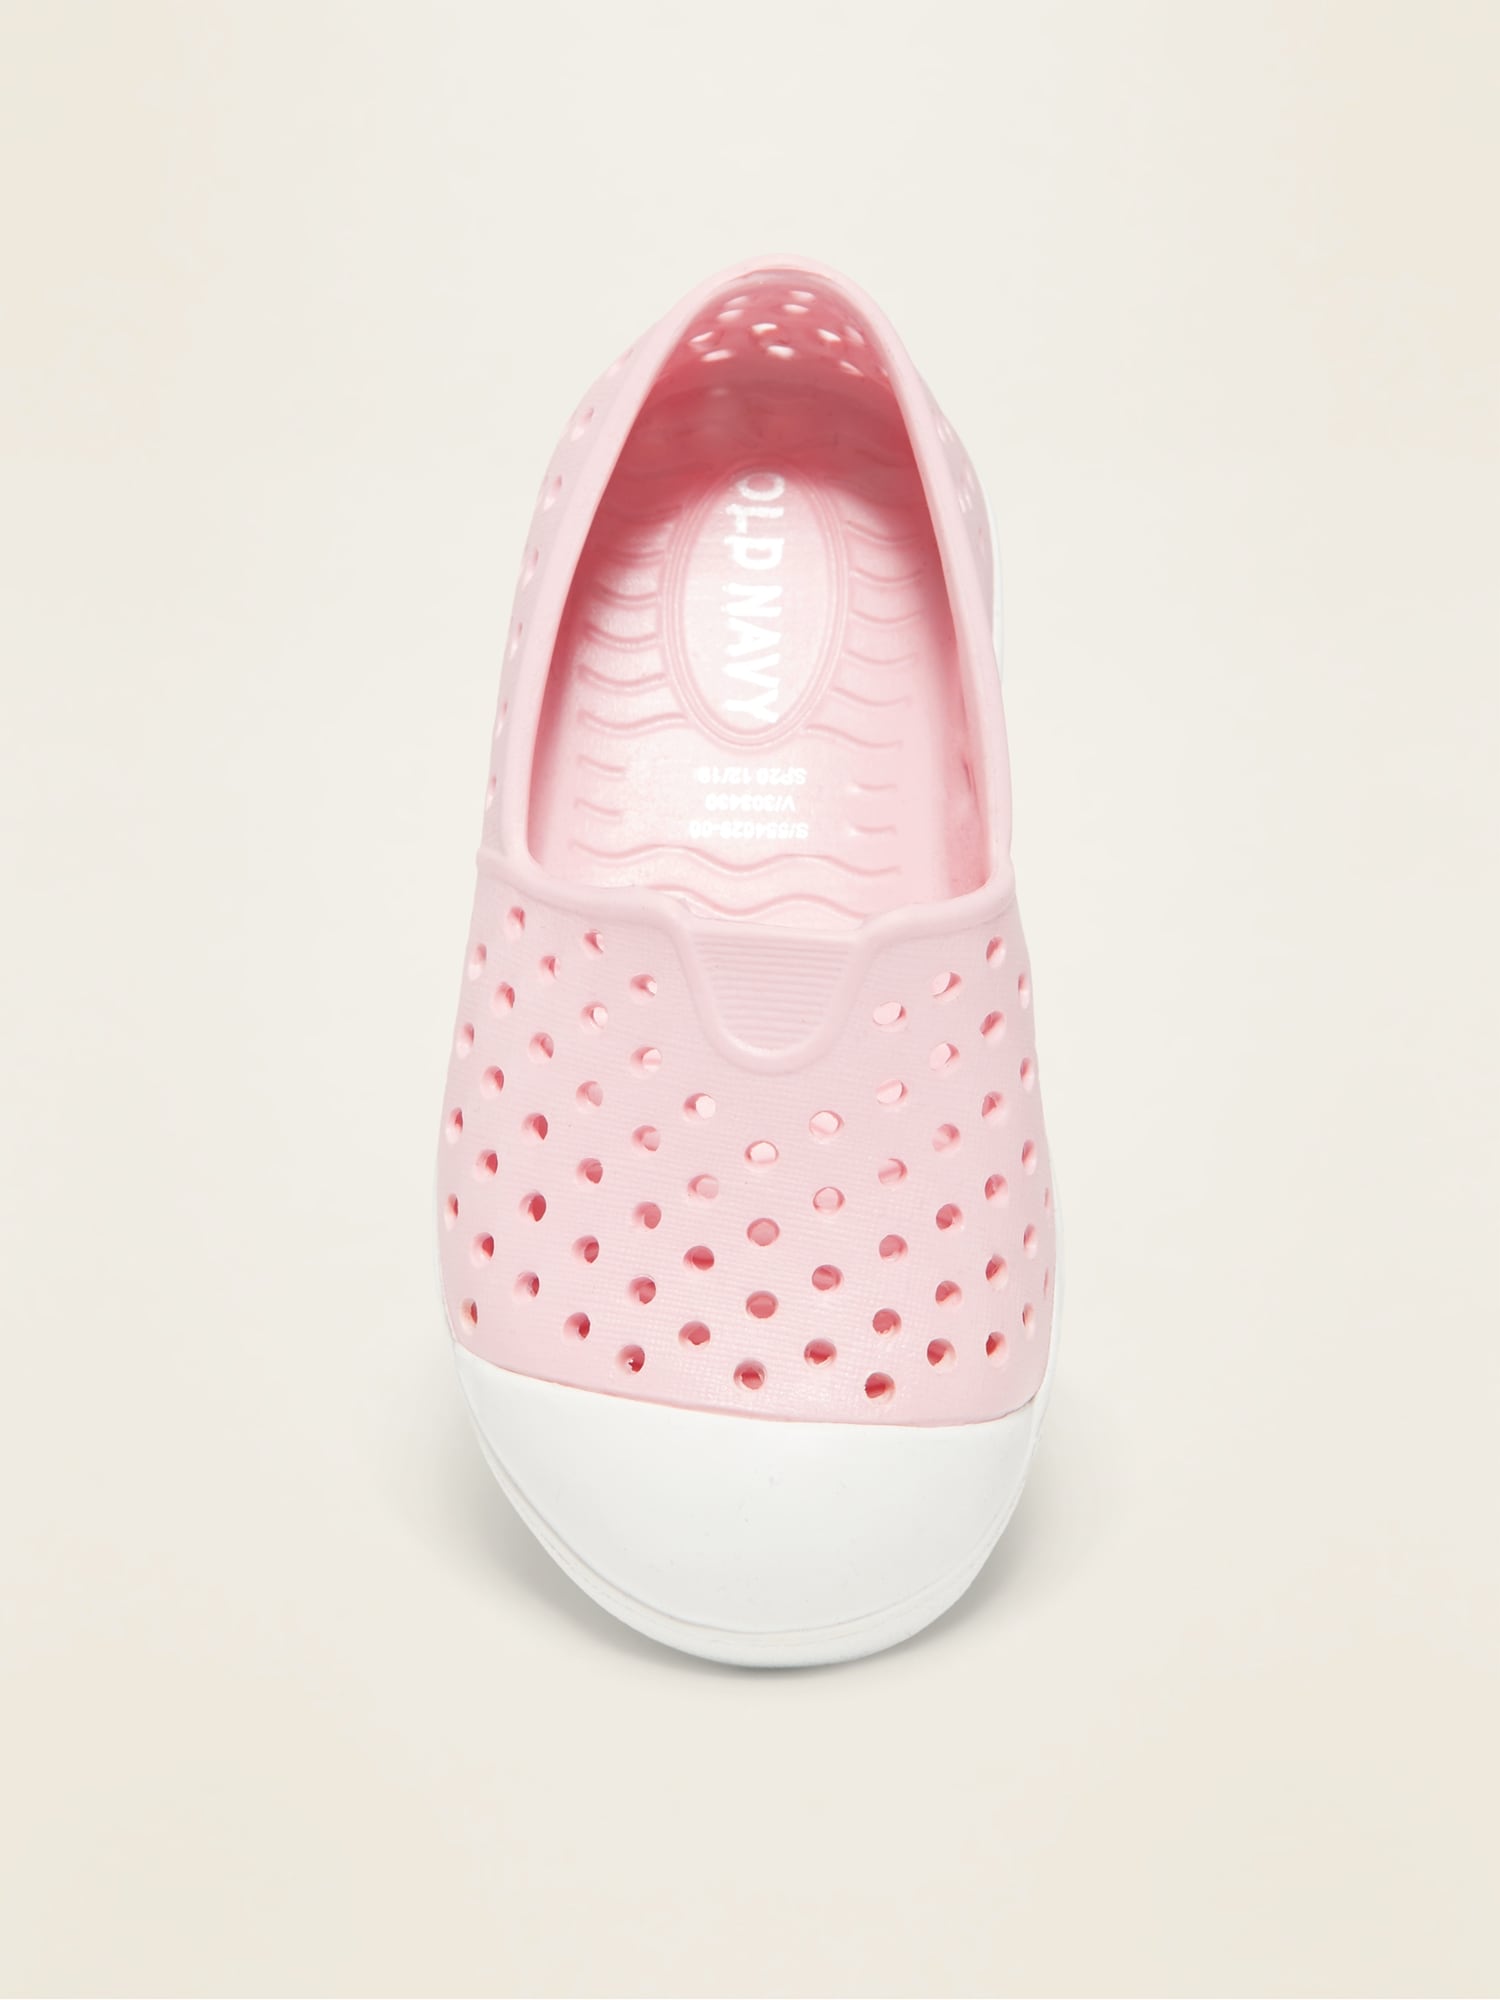 old navy perforated slip ons